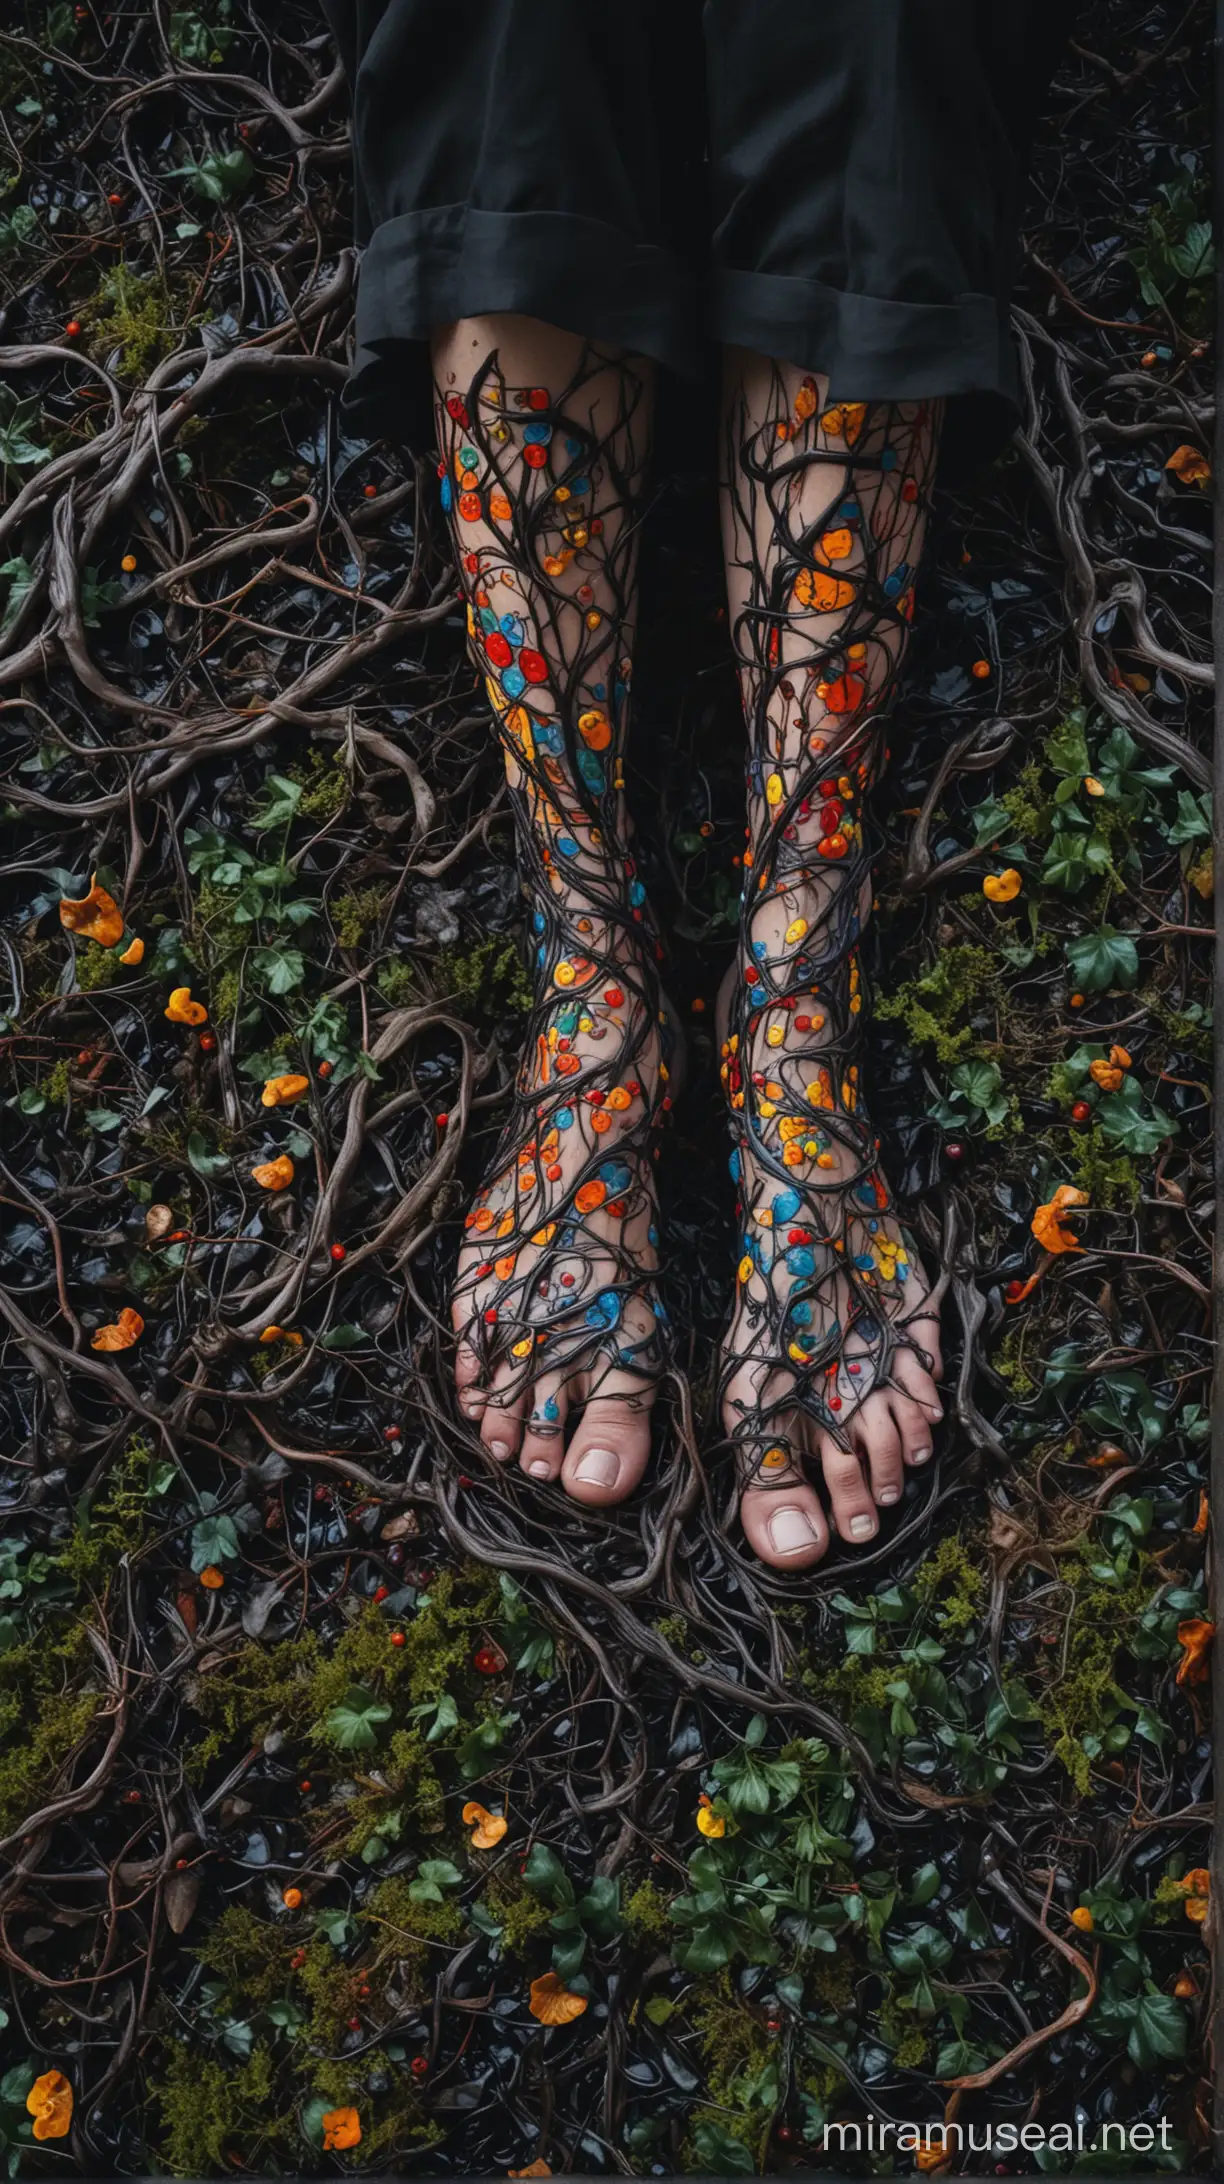 Generate an abstract representation of foot fungus as colorful, swirling patterns intertwining with a person's feet, evoking discomfort and unease amidst a surreal landscape filled with twisted vines and dark shadows.